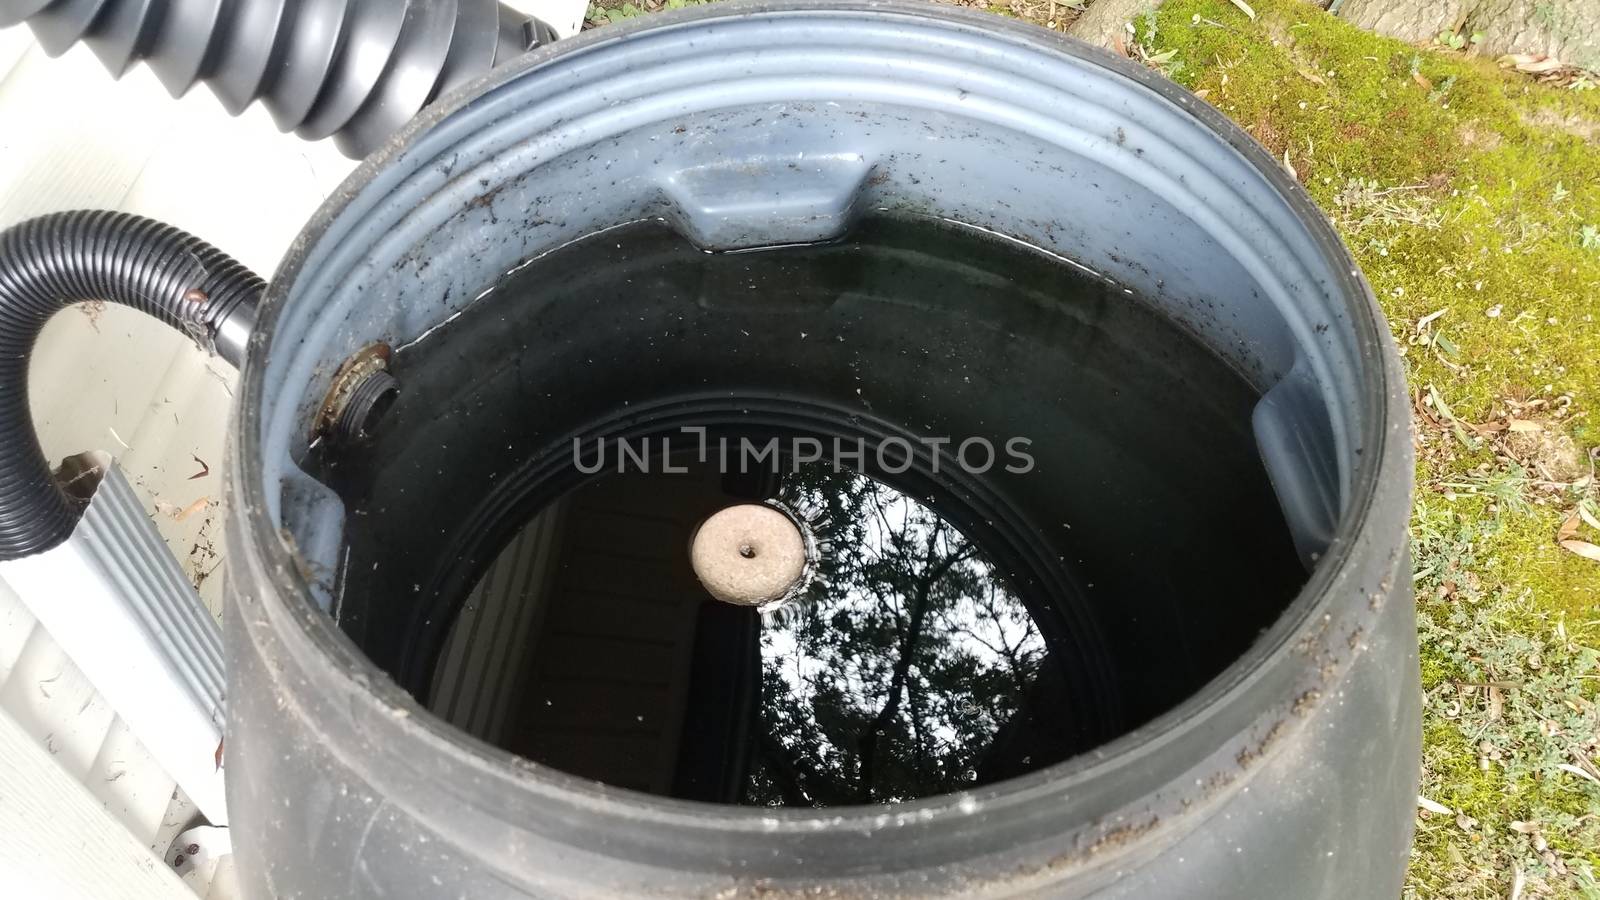 mosquito tablet insecticide floating in rain barrel with water